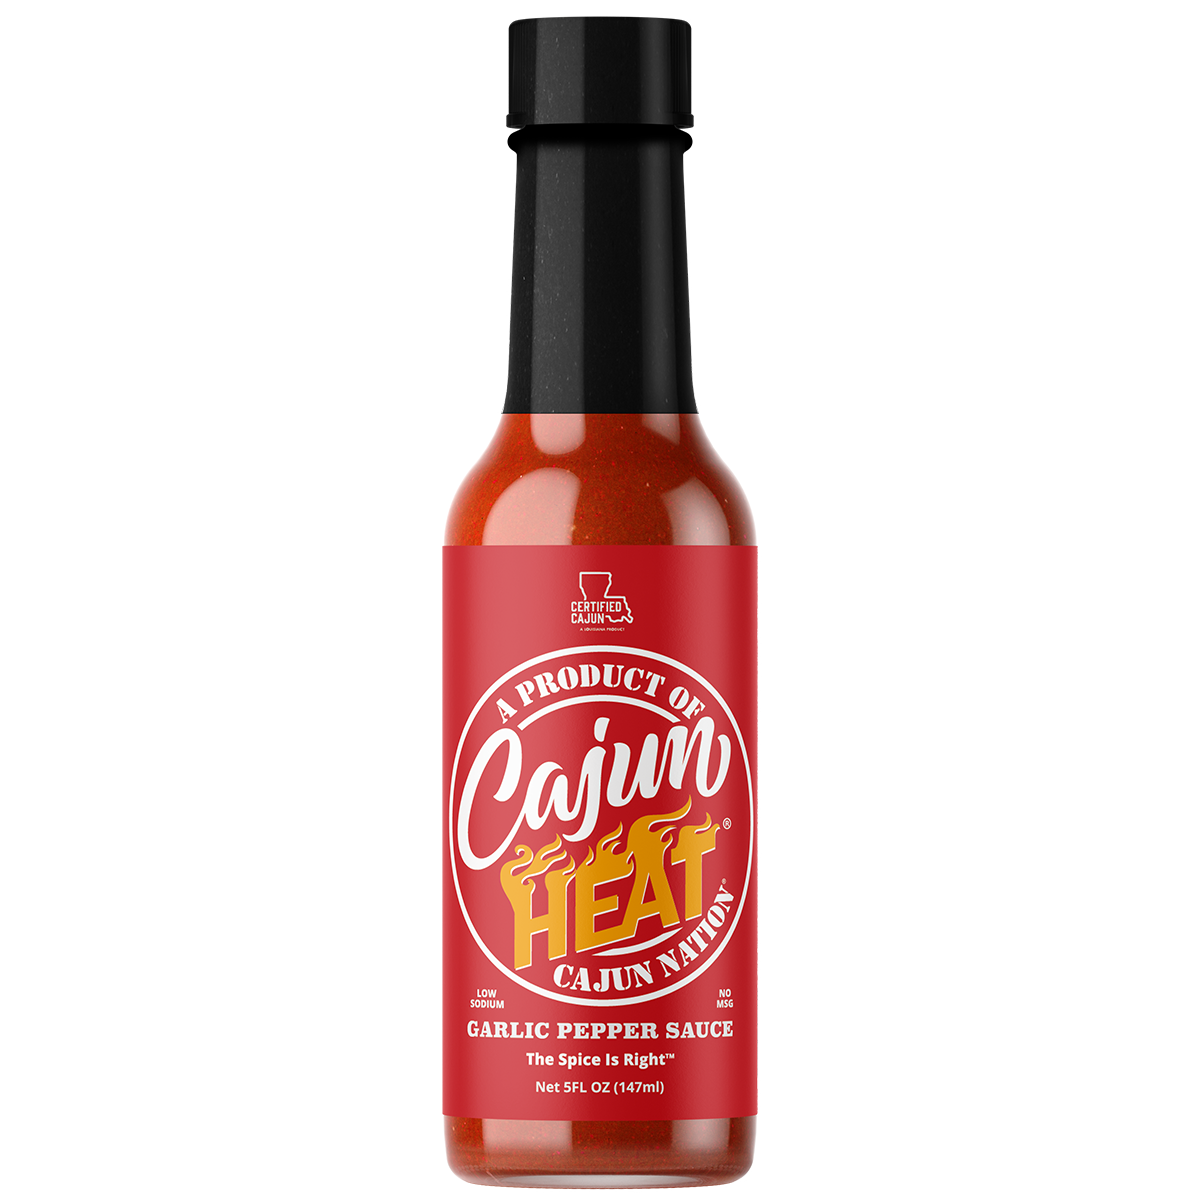  Cajun Heat Garlic Pepper Sauce is a Certified Cajun LOW SODIUM 5 oz flavorful blend of Cajun Red Peppers and Garlic Juice with No MSG blended for the Home Chef. It contains 100mg of sodium.